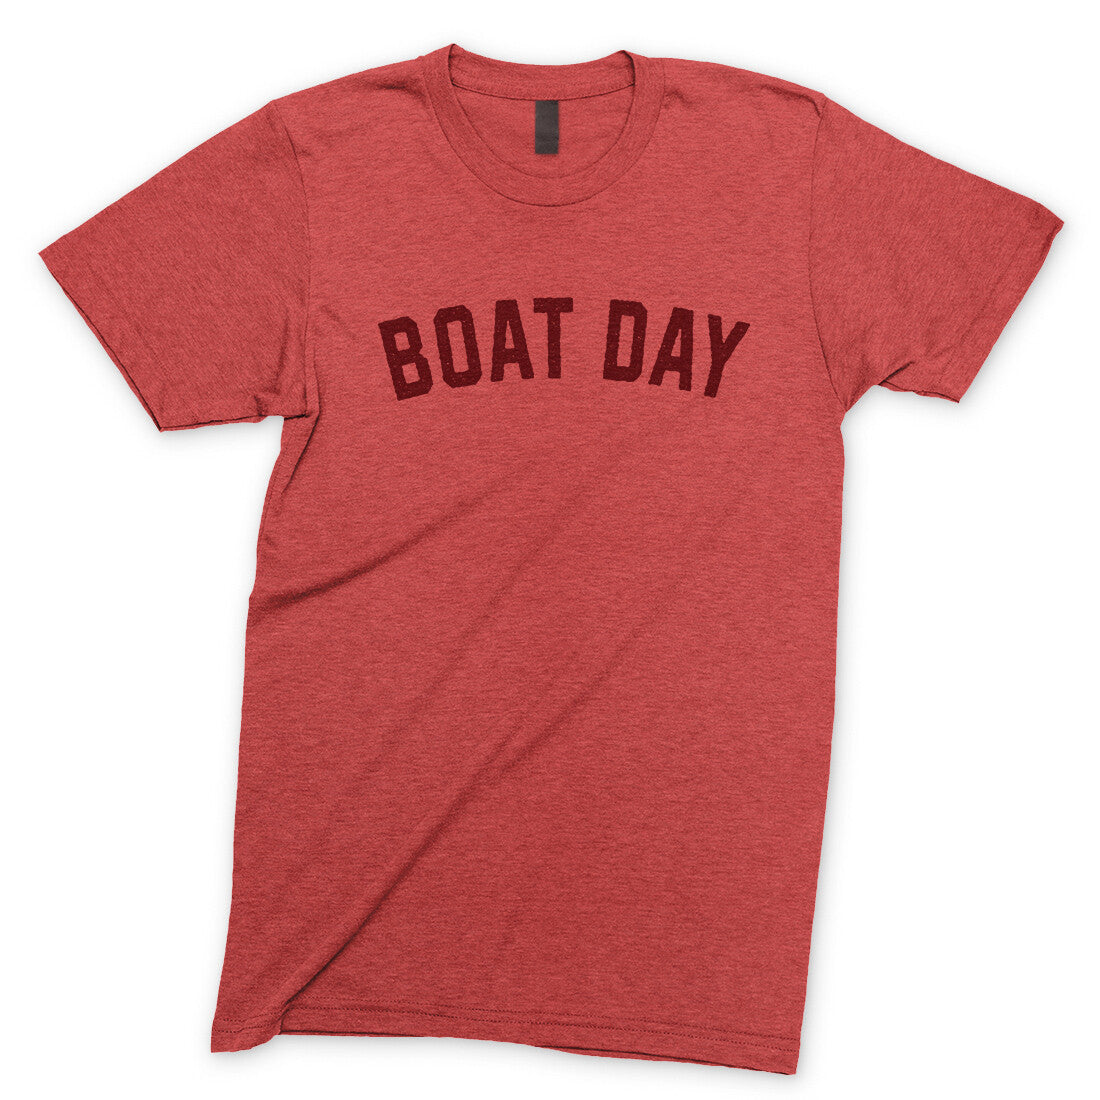 Boat Day in Heather Red Color